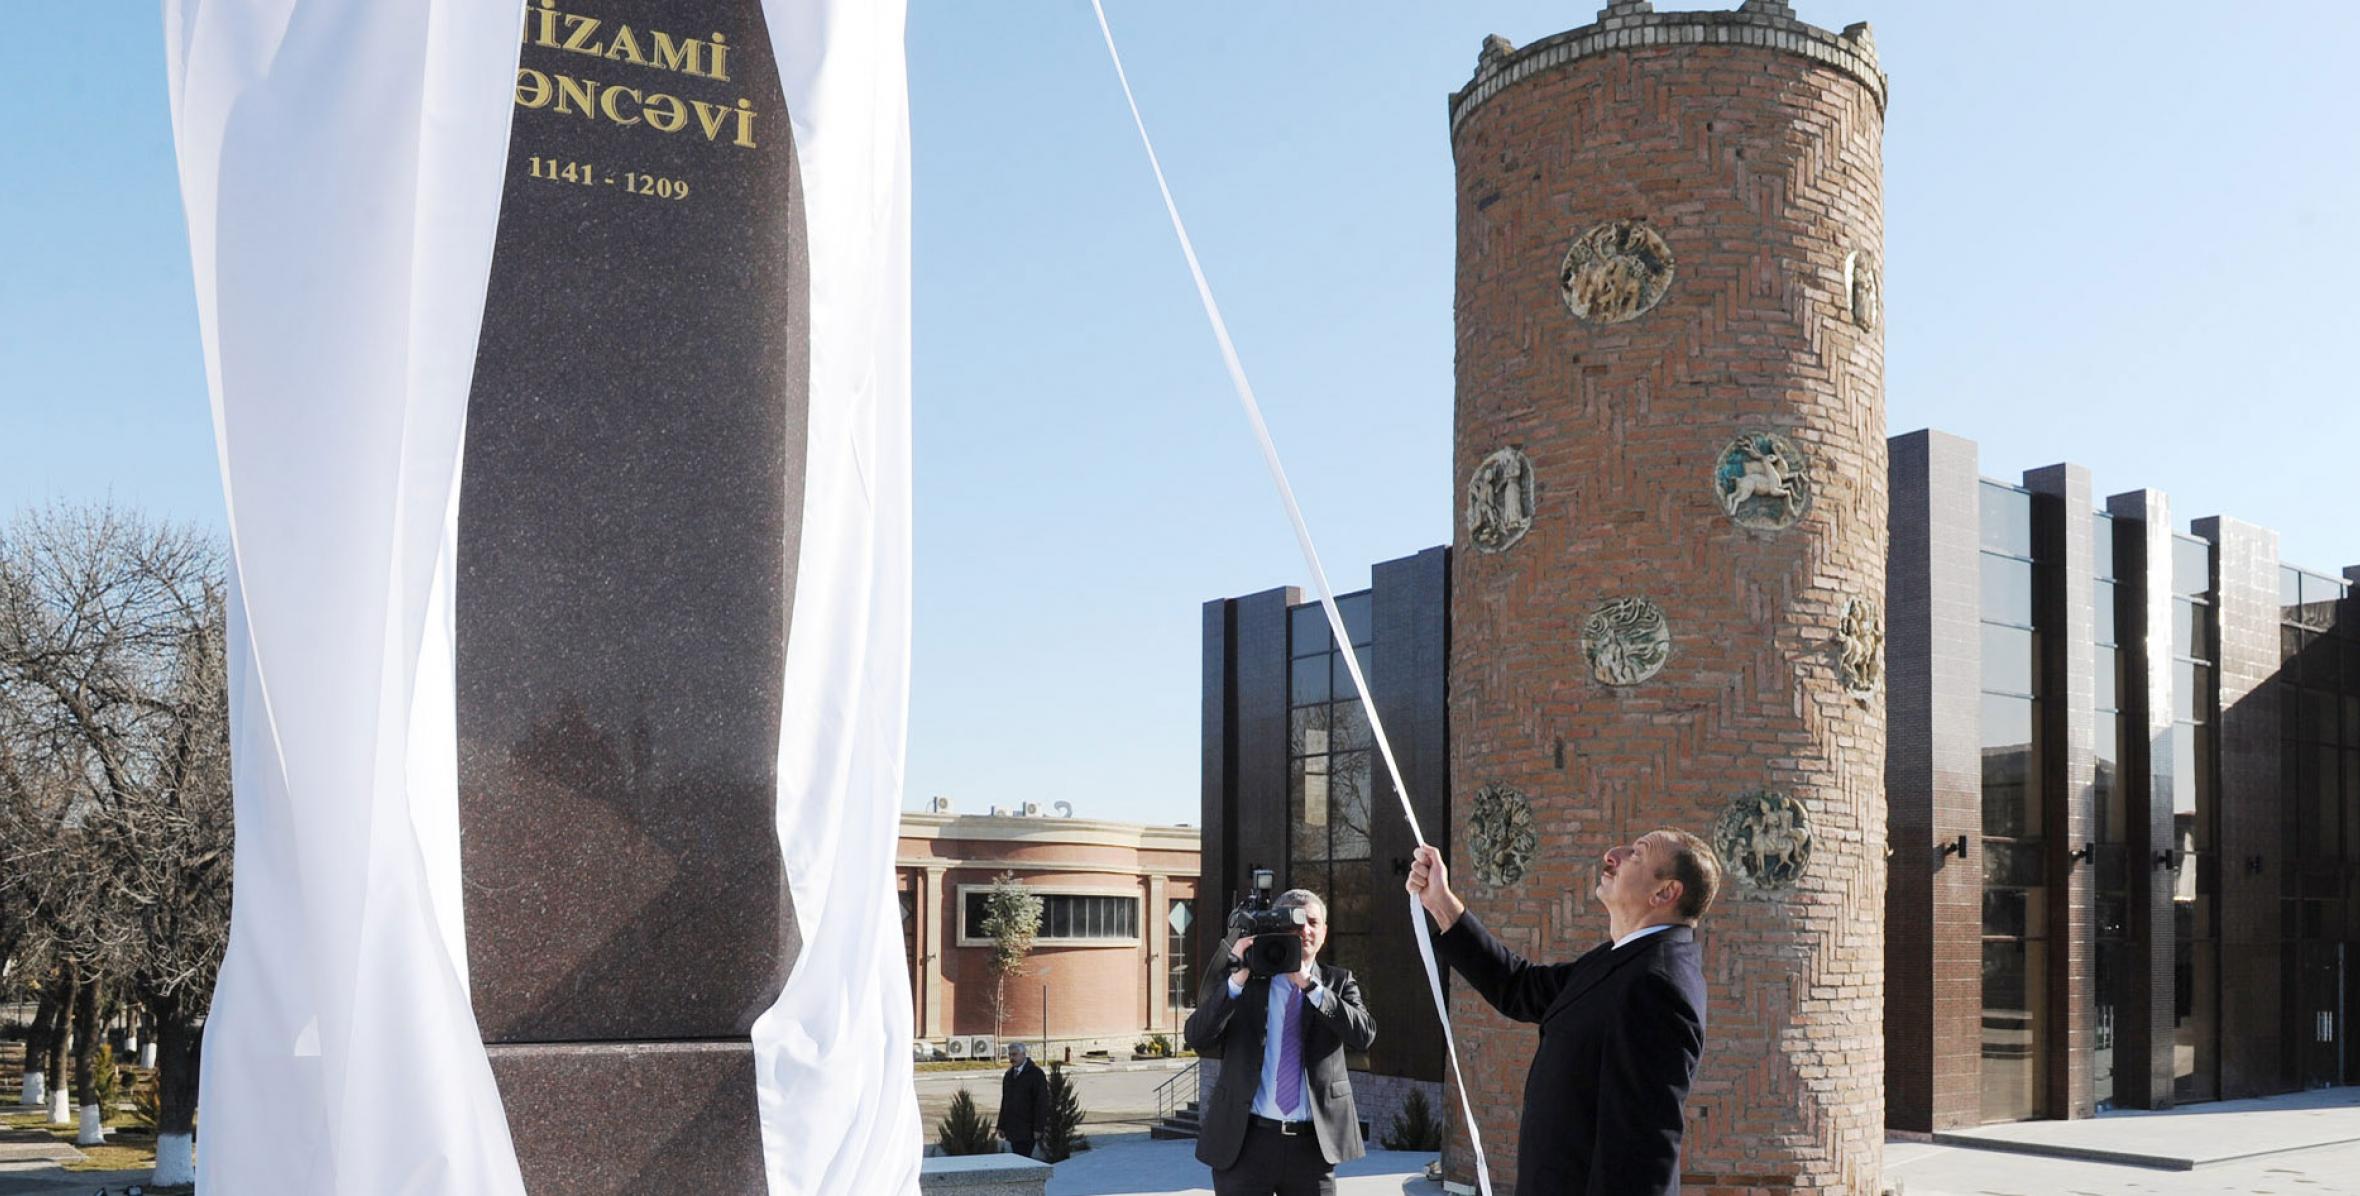 Ilham Aliyev took part at the opening the monument of Nizami Ganjavi in the Khamsa Monumental Compound in Ganja